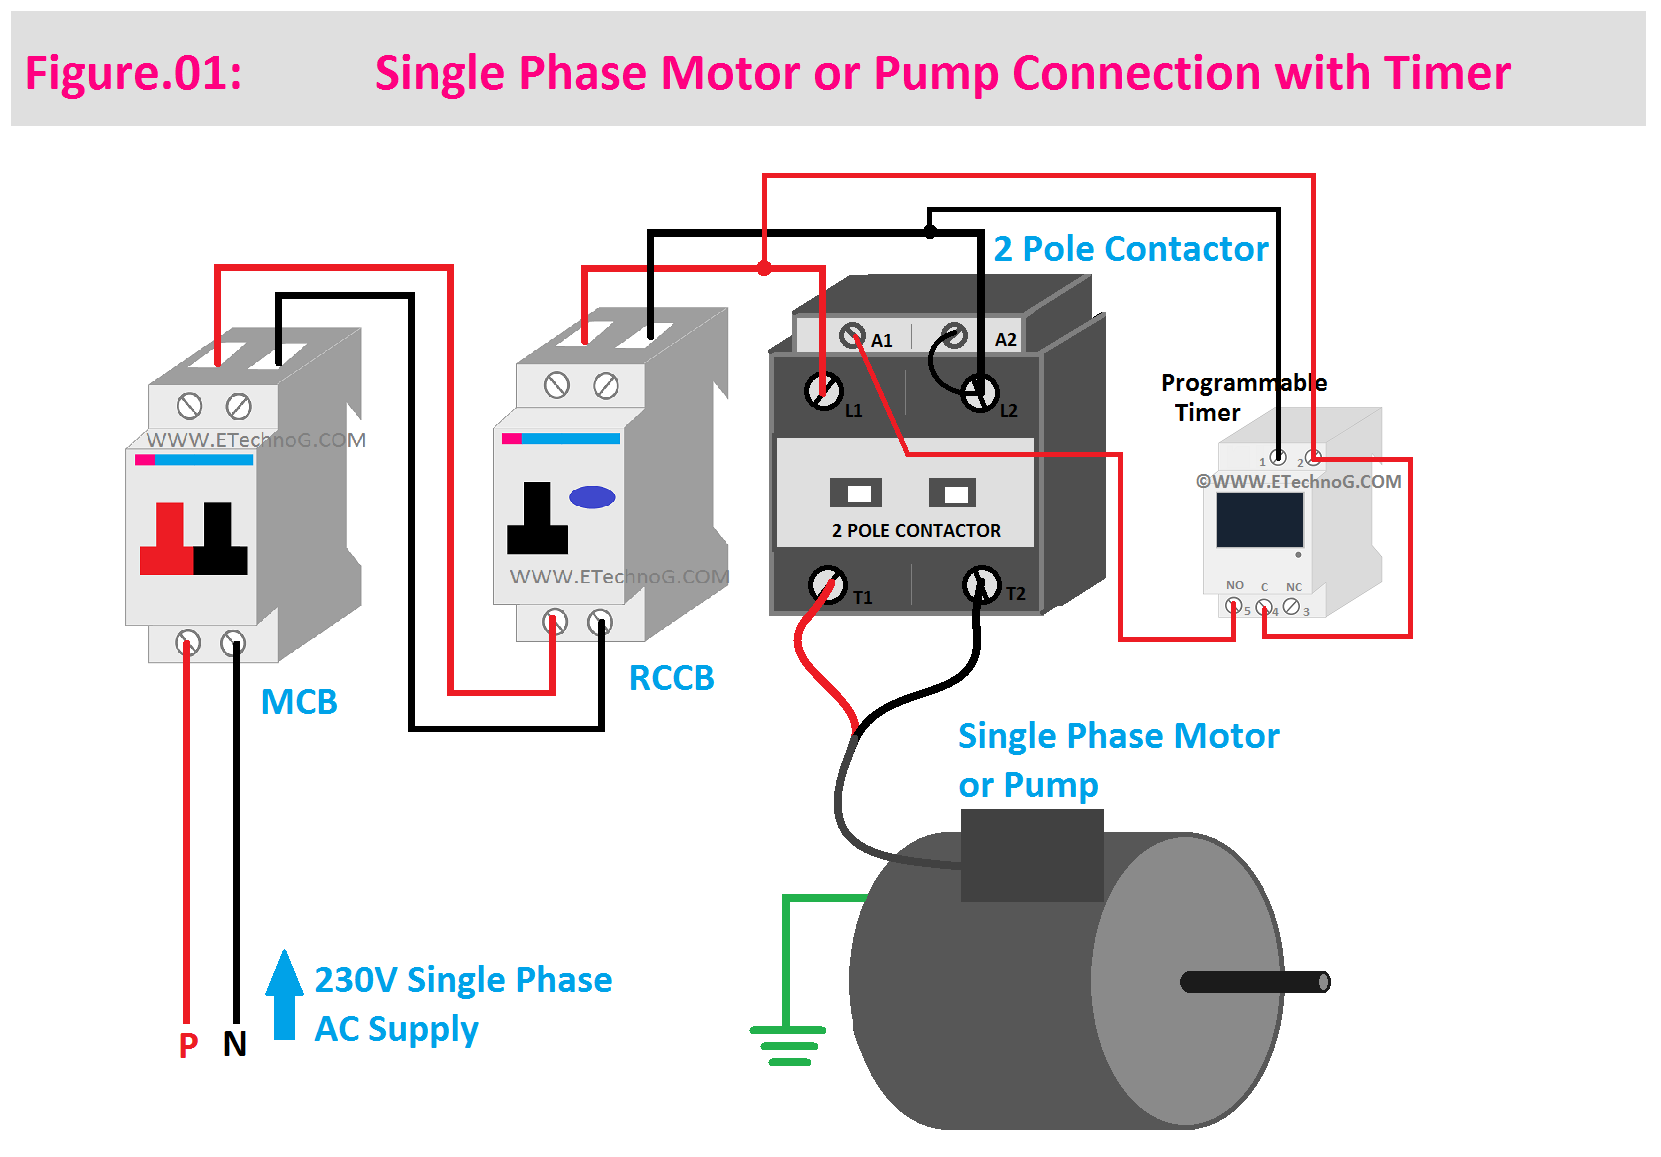 Single Phase Motor or Pump Connection with Timer for automatic control